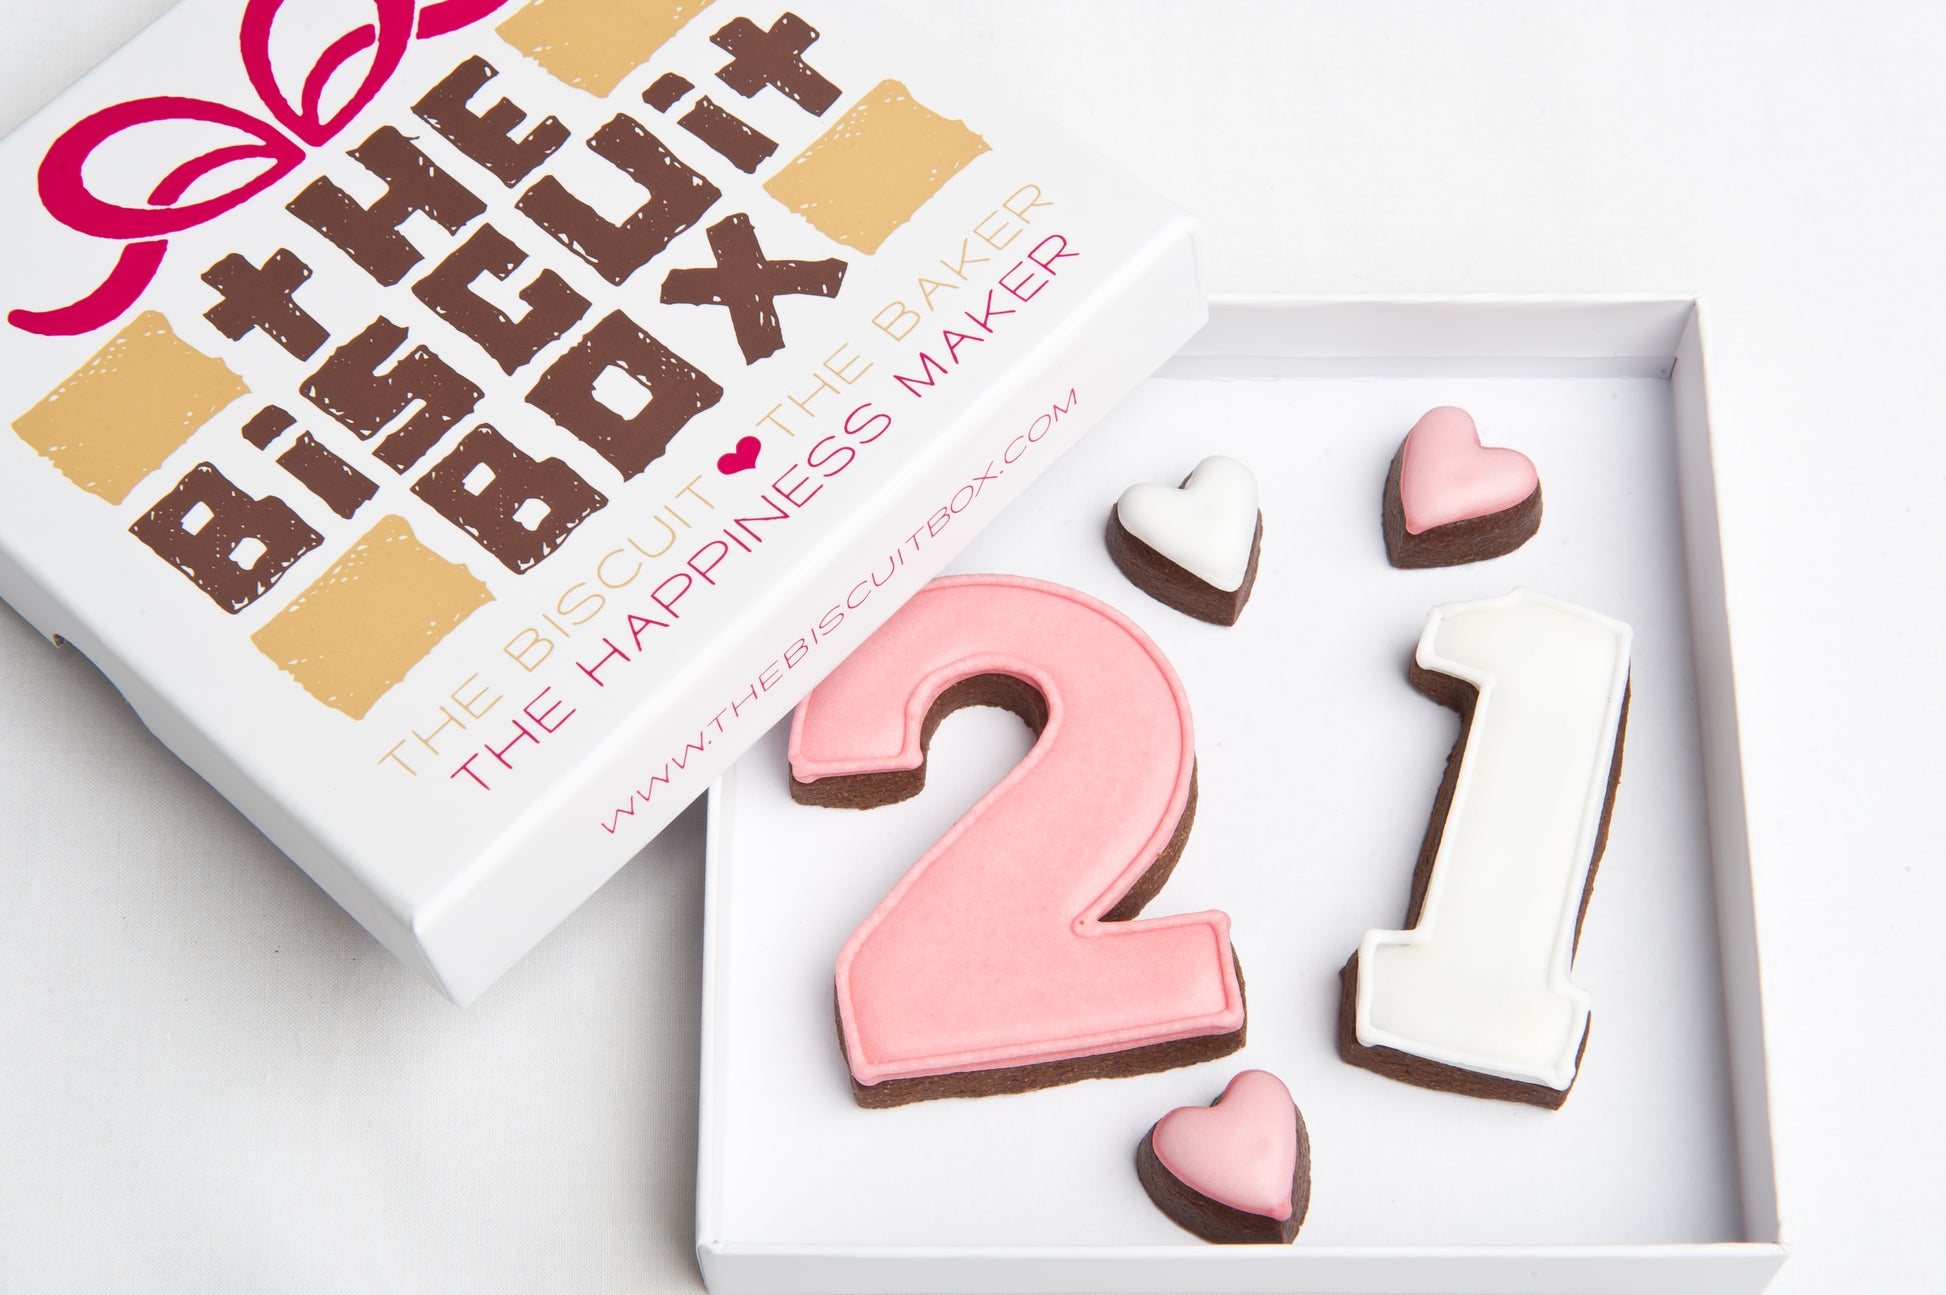 21st birthday biscuits. personalise any number in cookie shapes. Pink and white 21 birthday biscuits in a box with mini hearts.